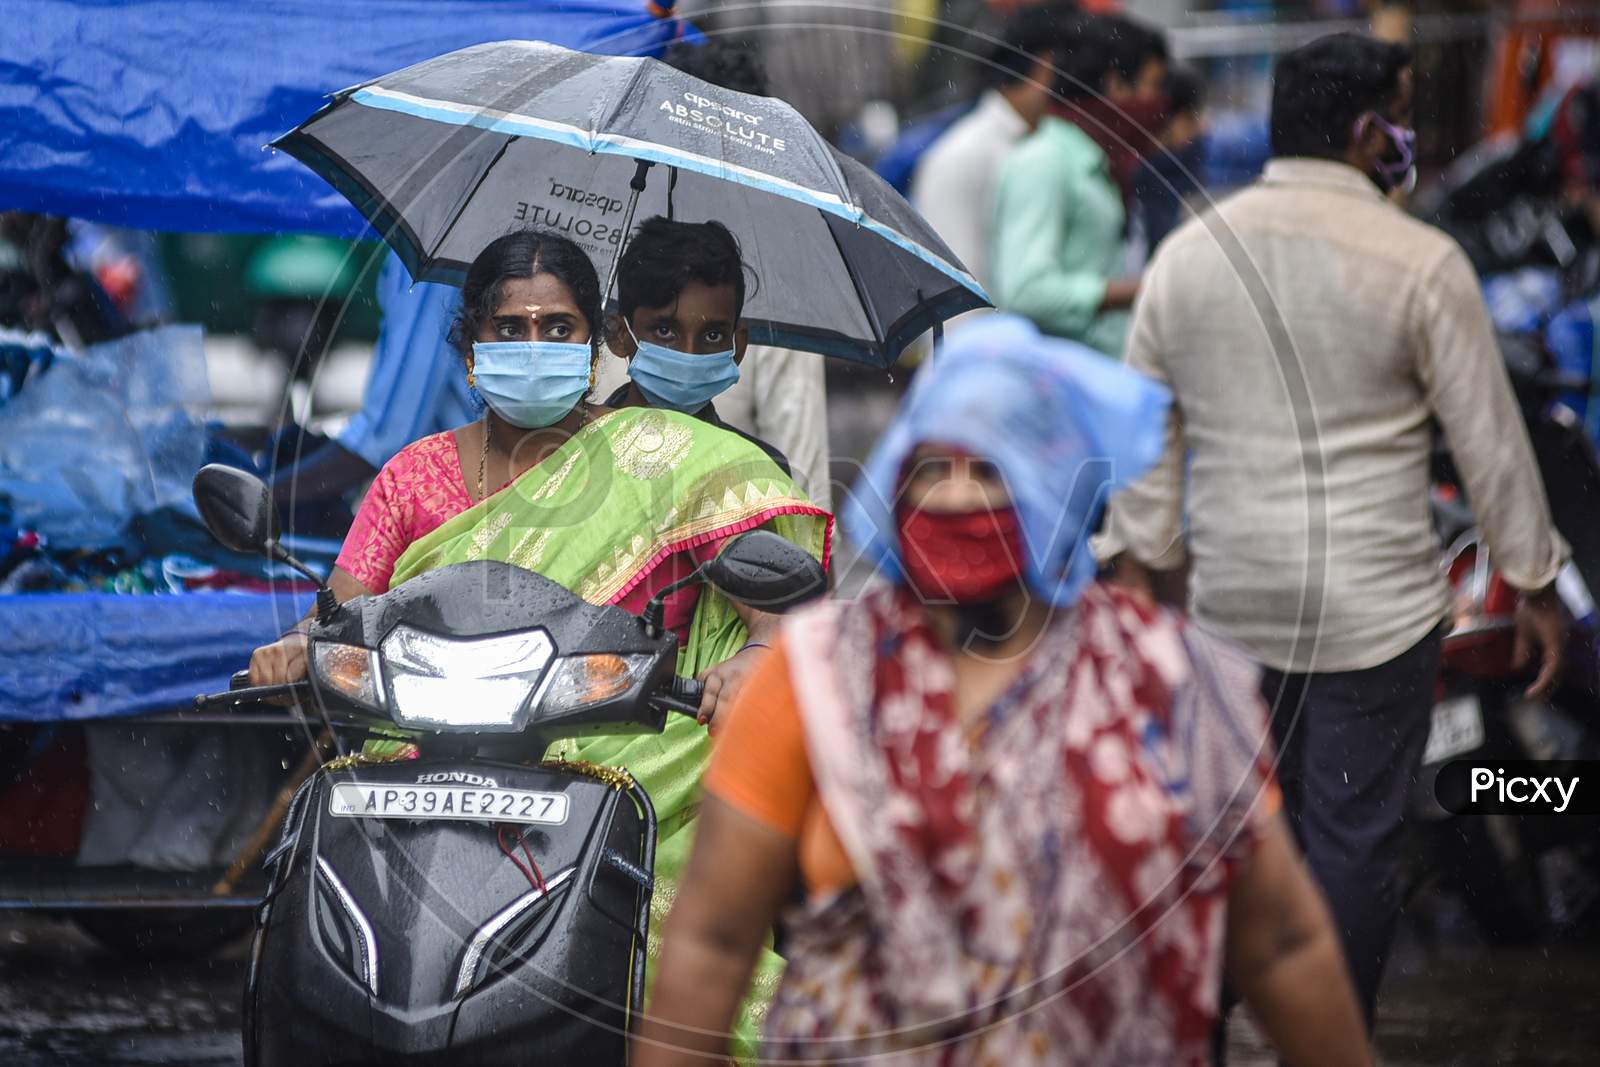 People Take Shelter Under An Umbrella While Riding A Vehicle, During The Rain, At Besant Road, In Vijayawada On August 15, 2020.